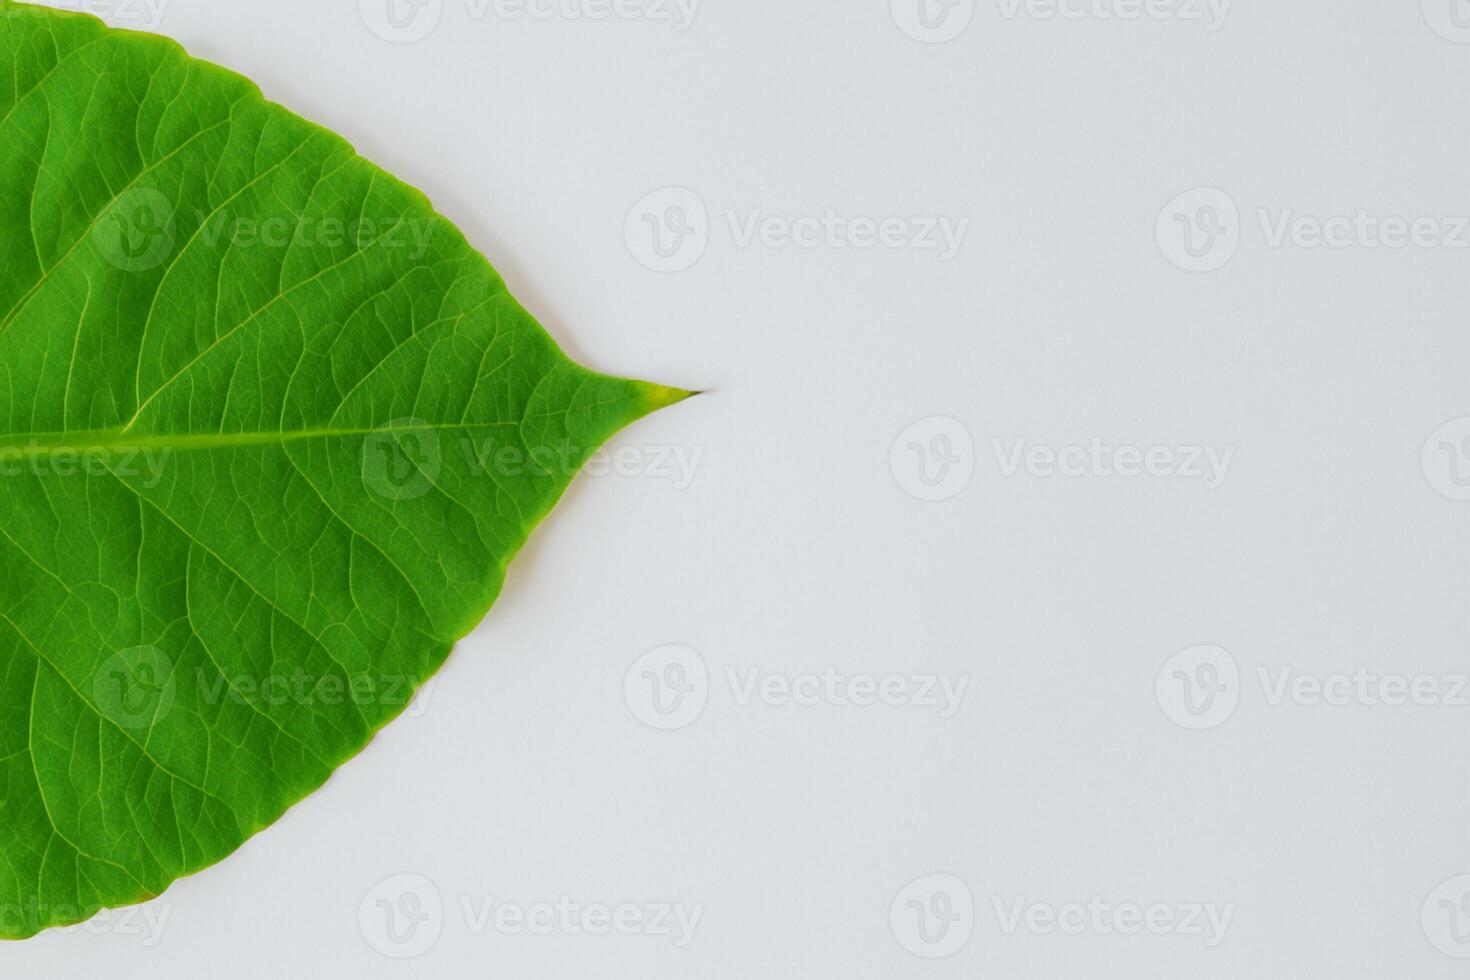 Whimsical Elegance Beautiful Leaves Grace White Paper Mockup, A Serene Fusion of Nature and Simplicity photo